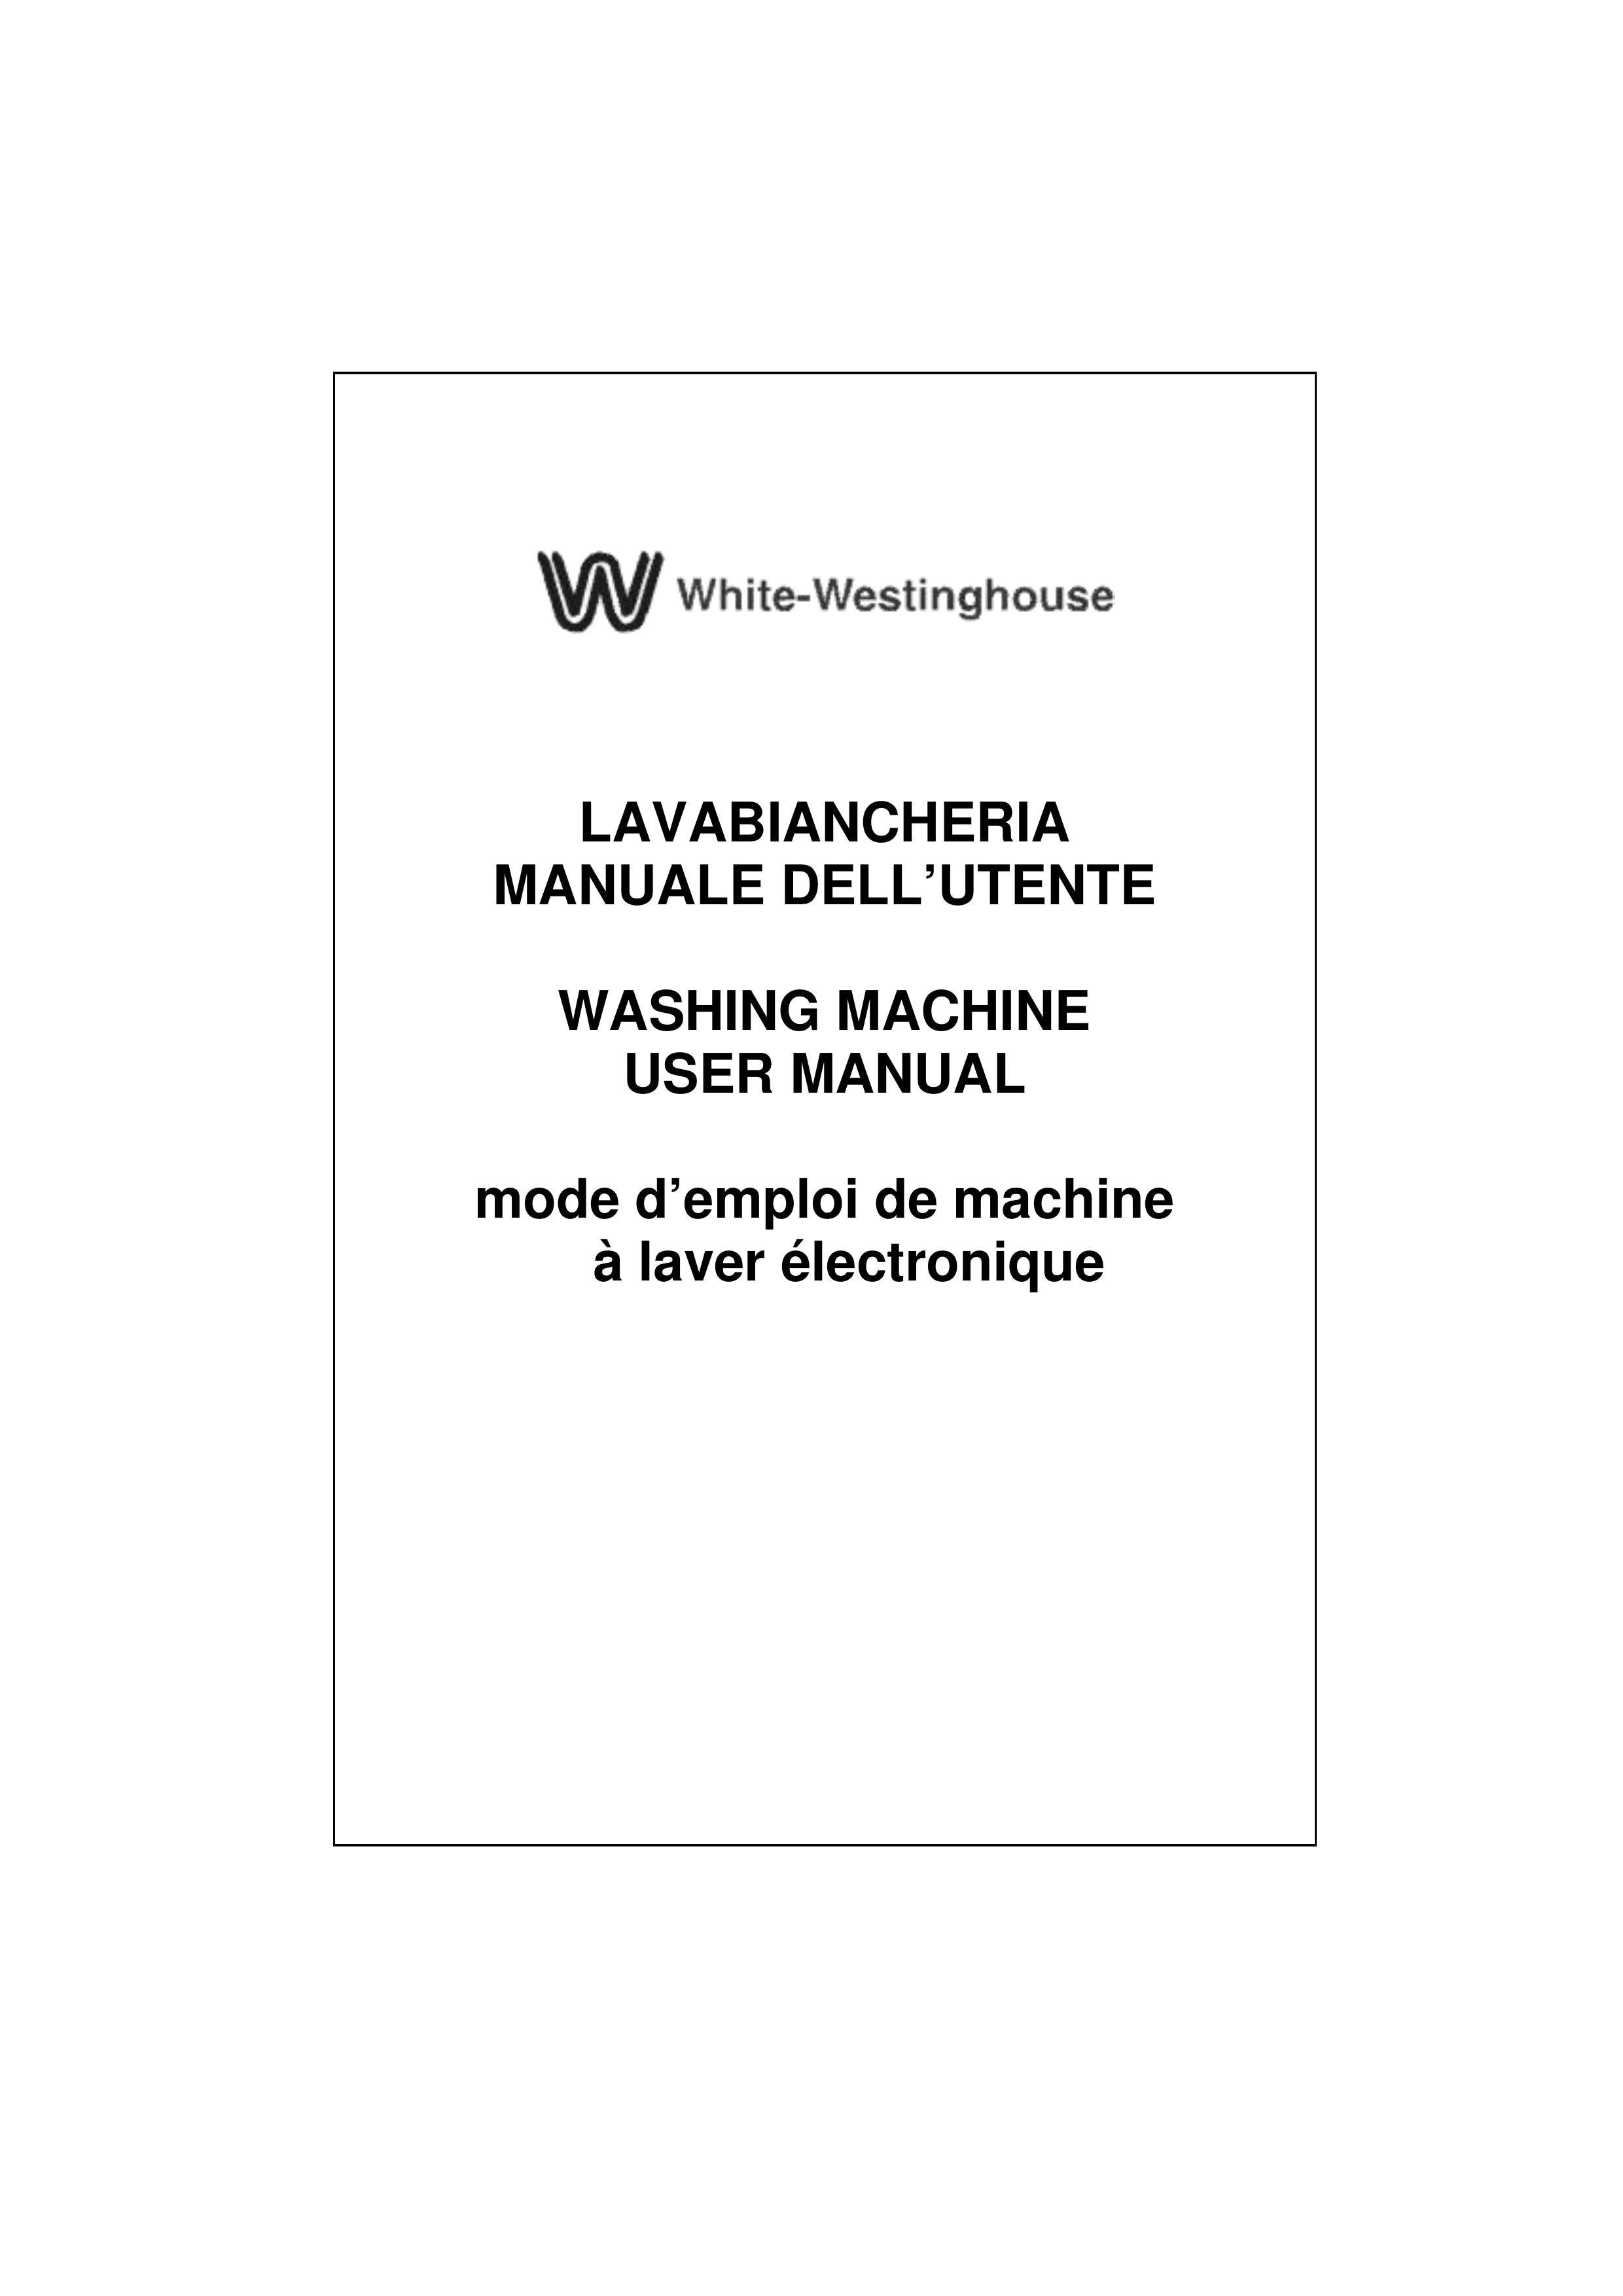 White-Westinghouse WM106 Washer/Dryer User Manual